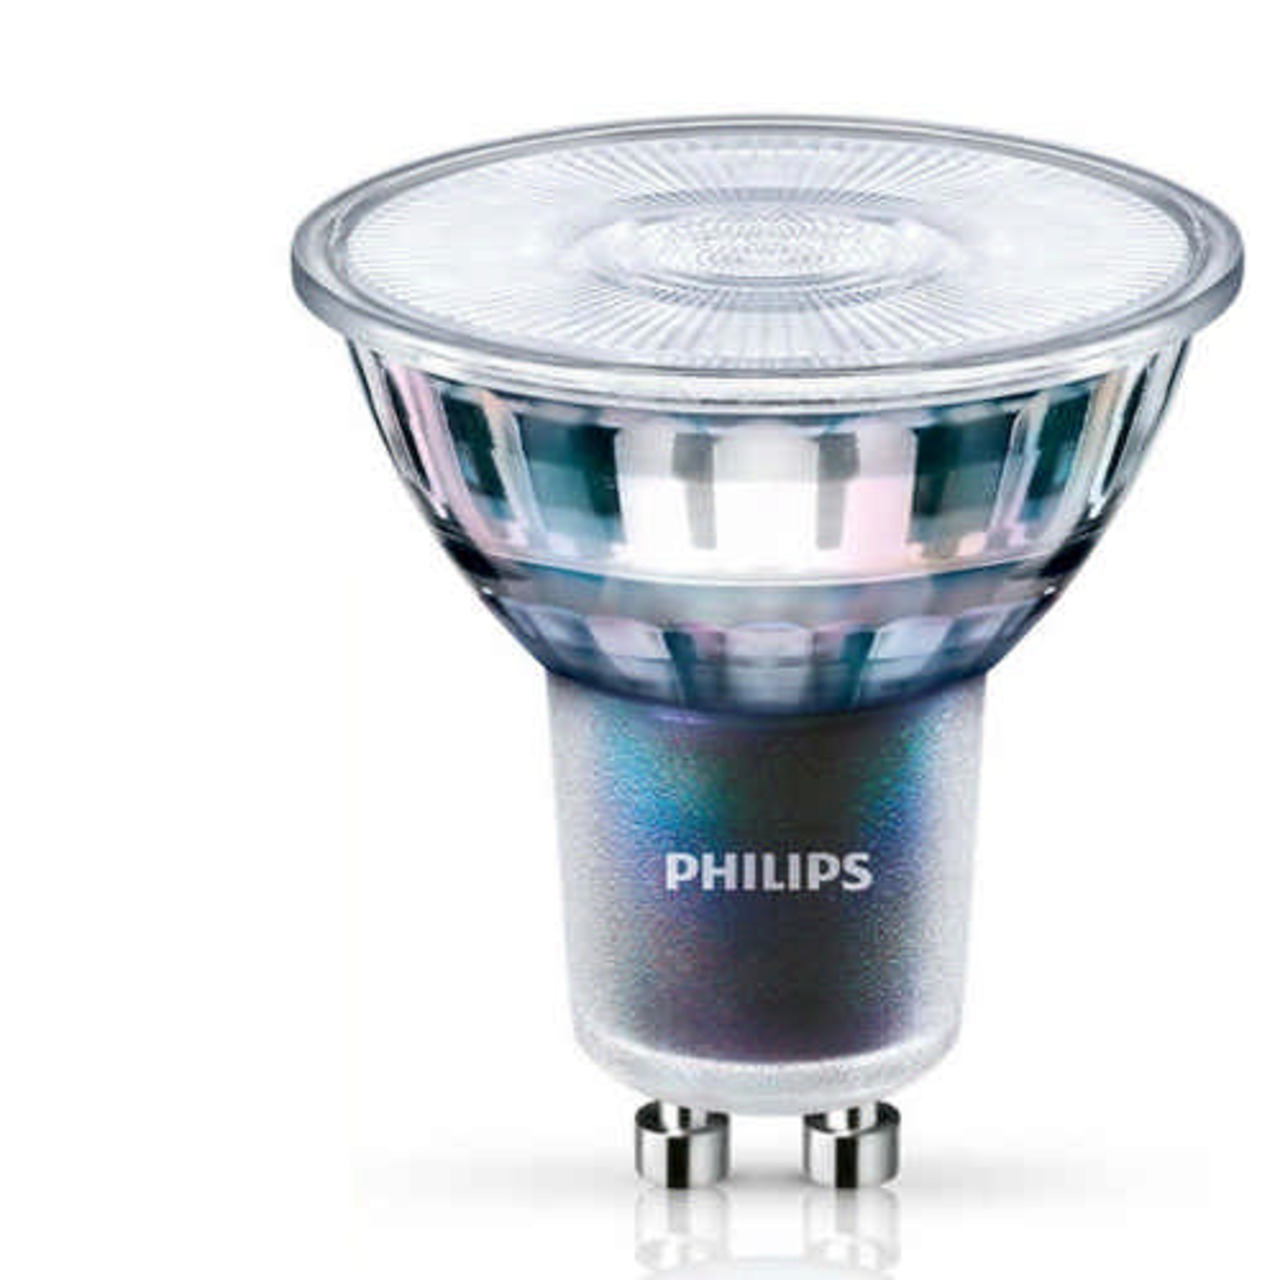 Philips MASTER ExpertColor 5-5-W-GU10-LED-Lampe- 375 lm- 97 Ra- 25- 3000K- warmweiss- dimmbar unter Beleuchtung